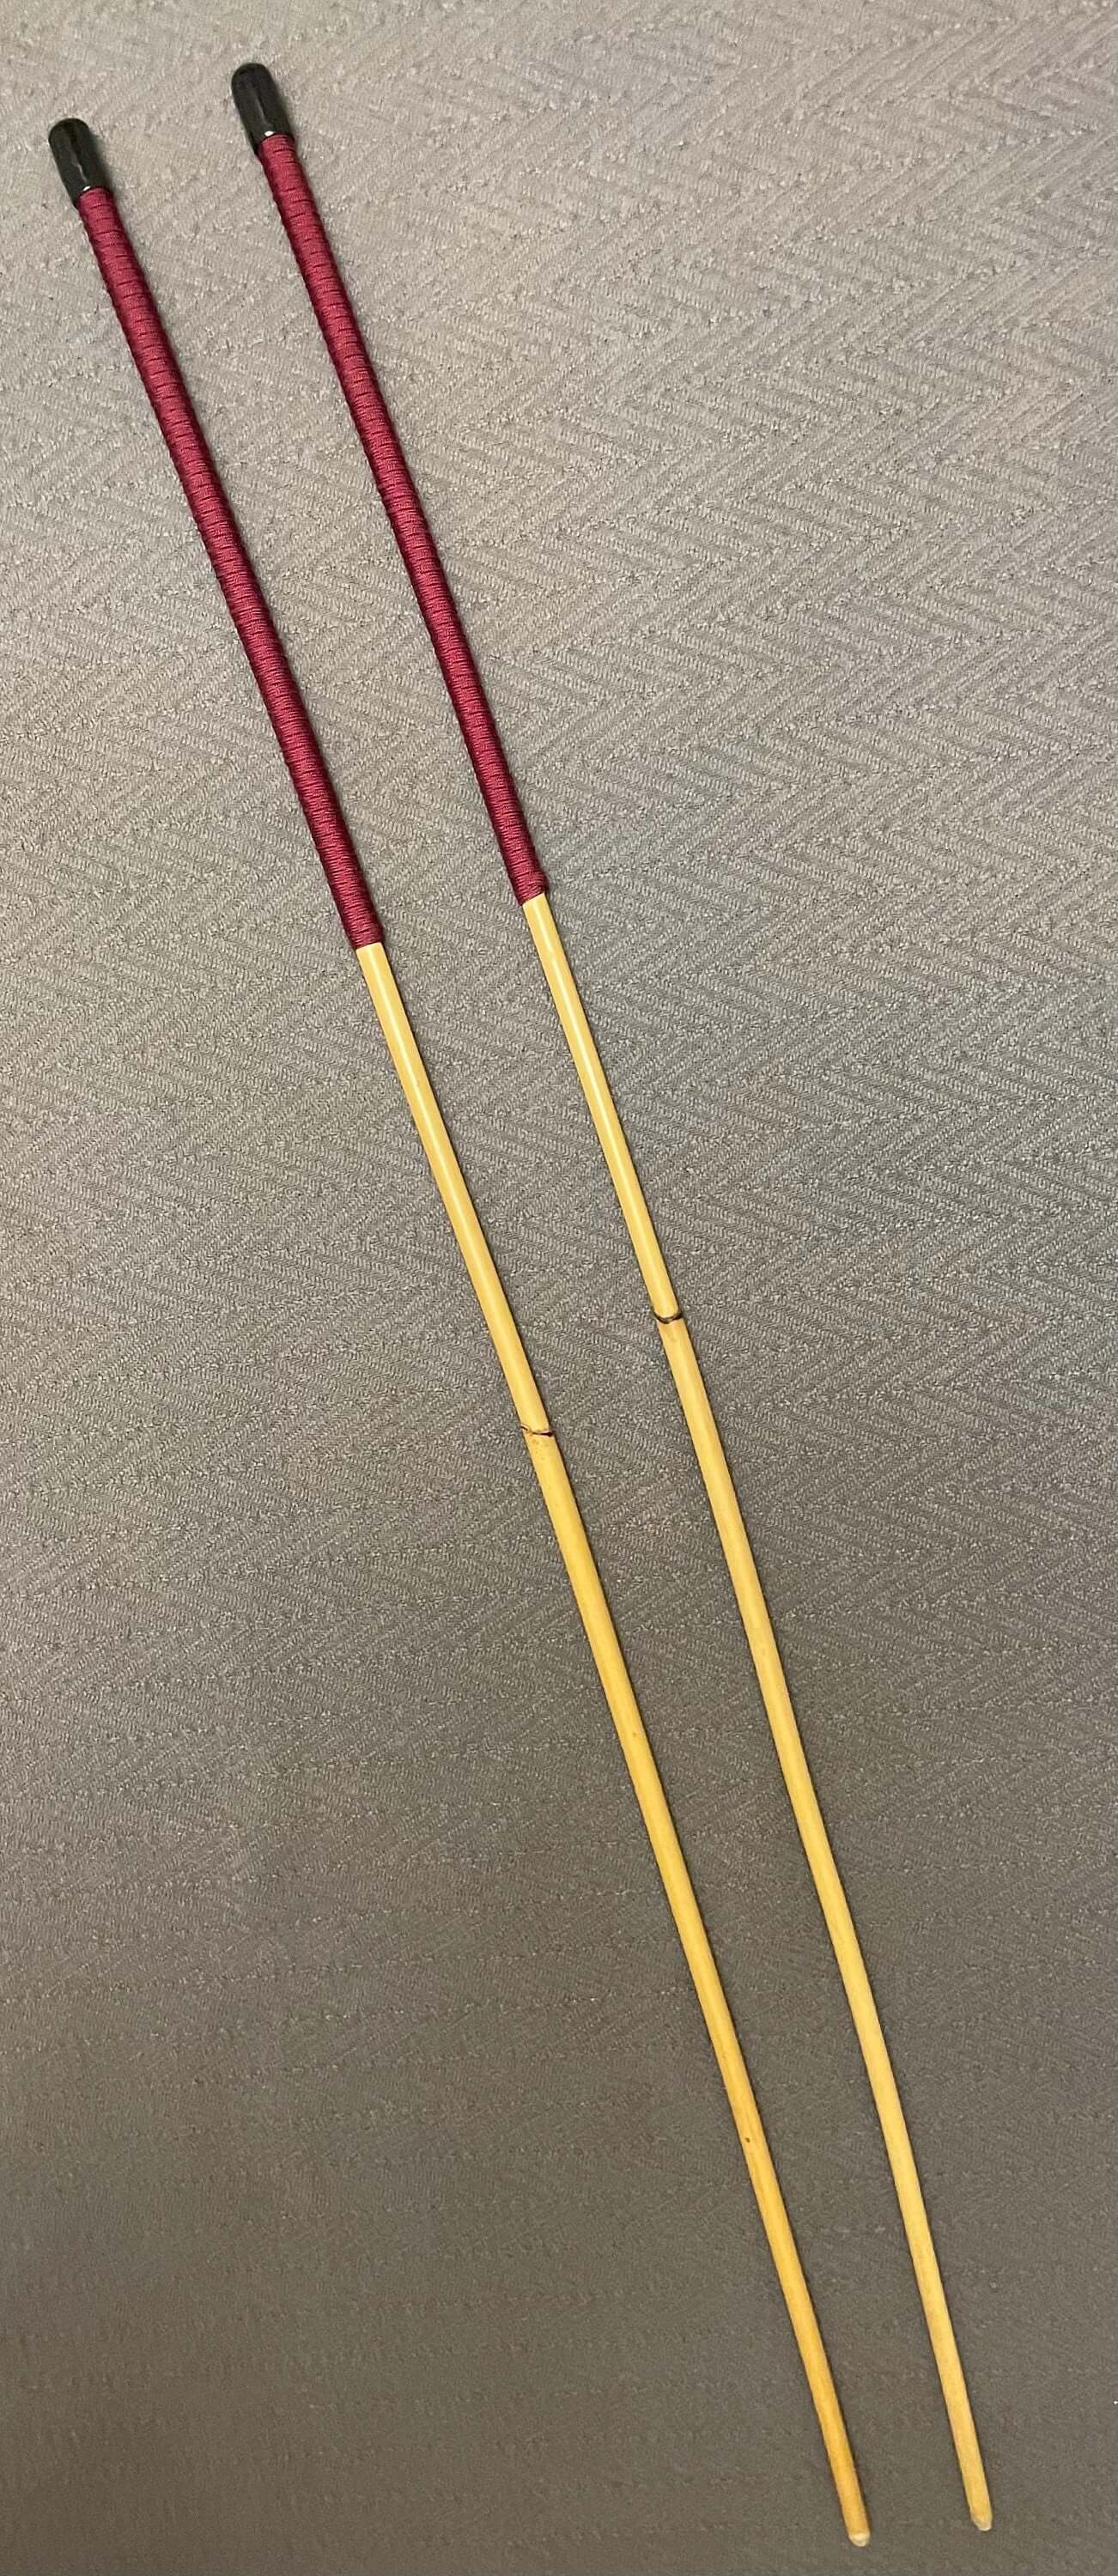 Set of 2 Classic Dragon Rattan Canes / School Canes - 90-95 cms Length with Paracord Handles